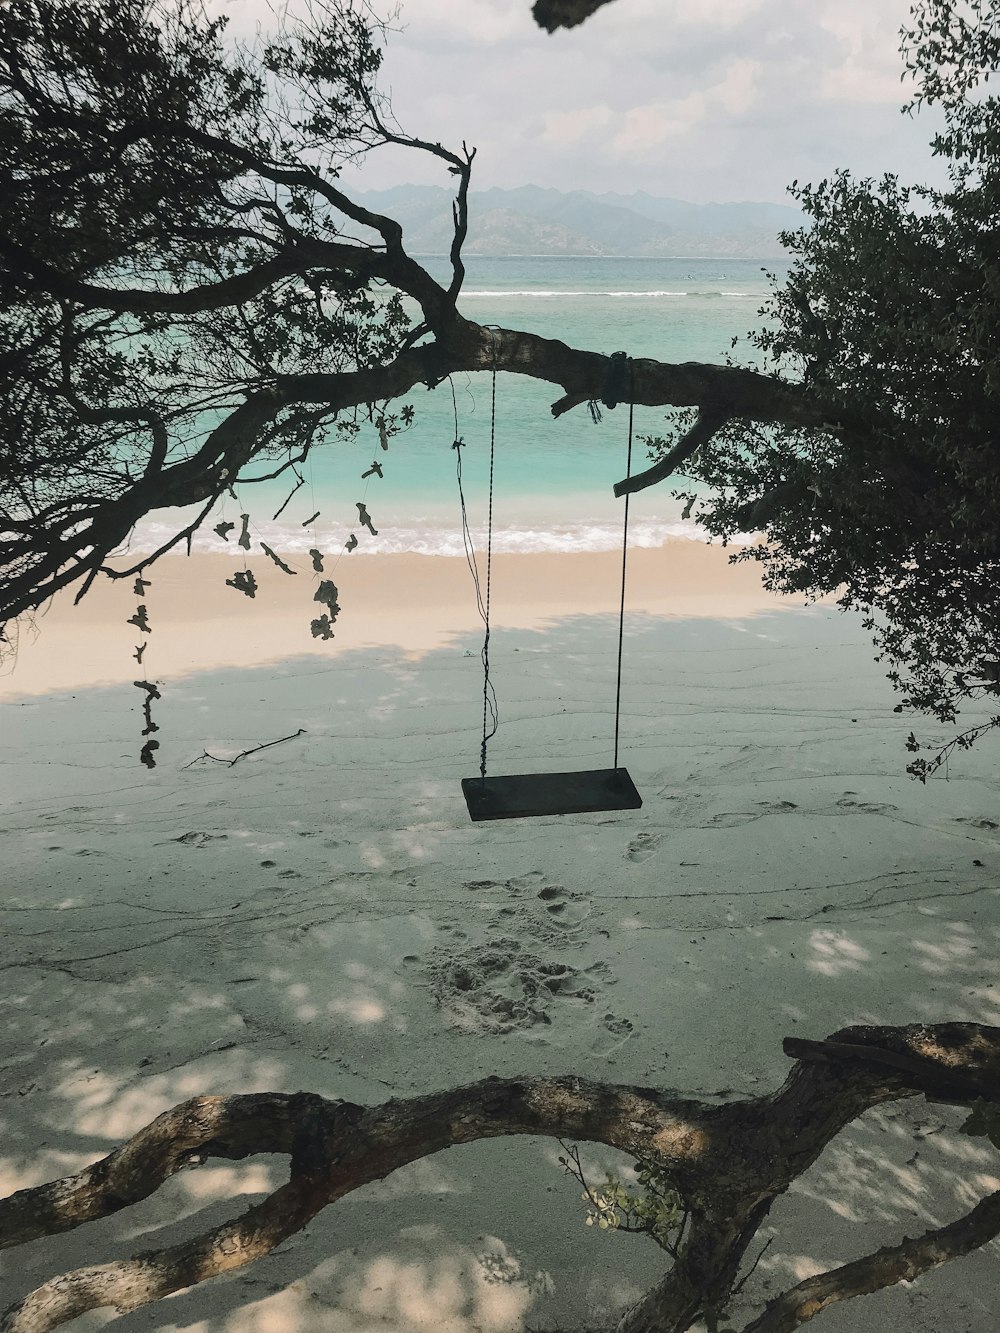 a swing hanging from a tree on a beach